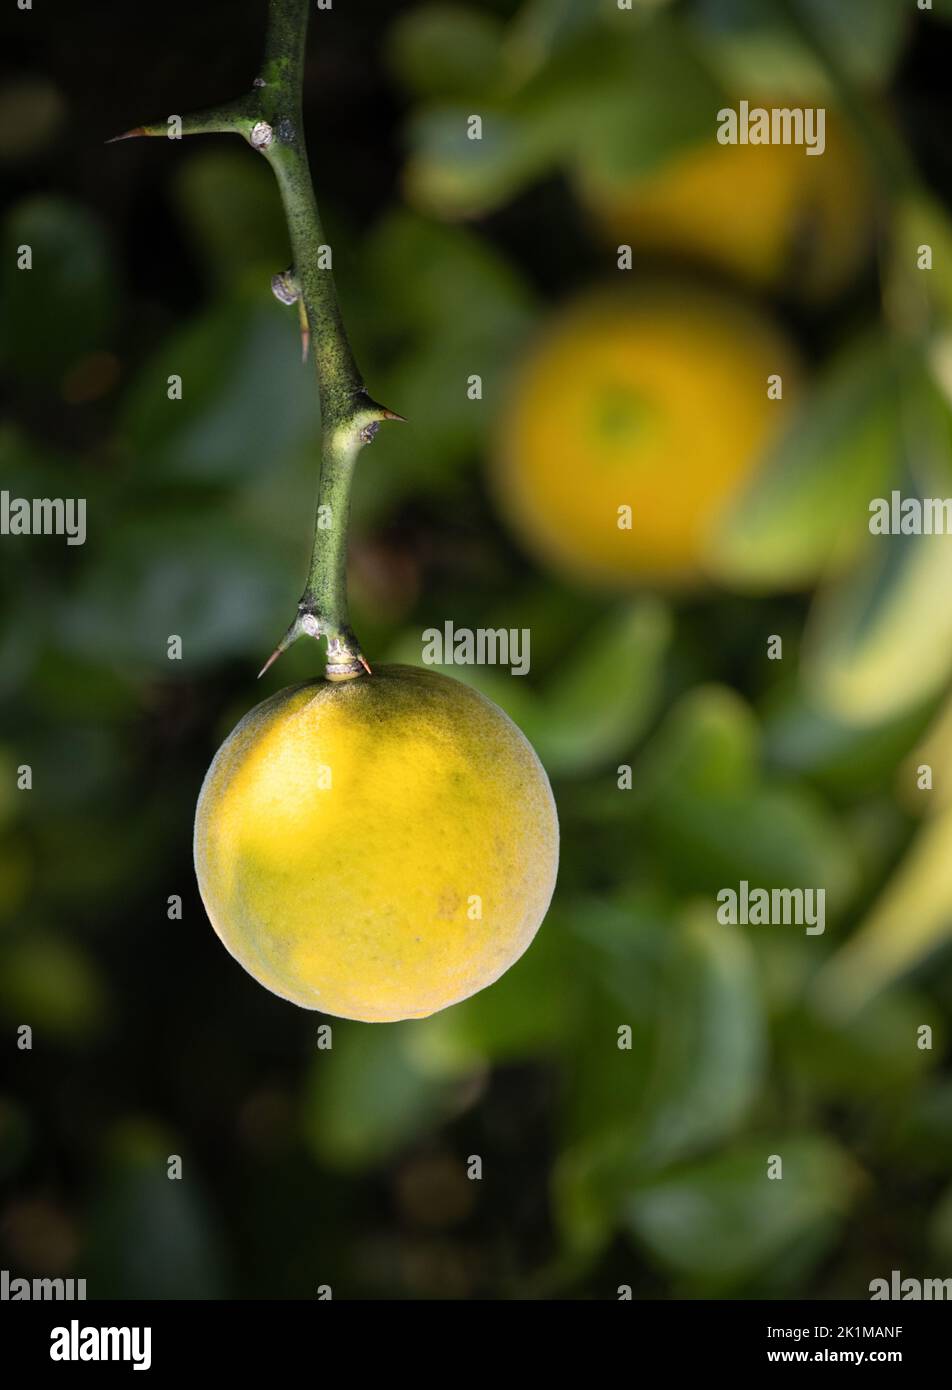 Small yellow round lemons, Citrus limon, hanging on a lemon tree with leaves and thorns in the sunshine, summer or fall, Lancaster, Pennsylvania Stock Photo